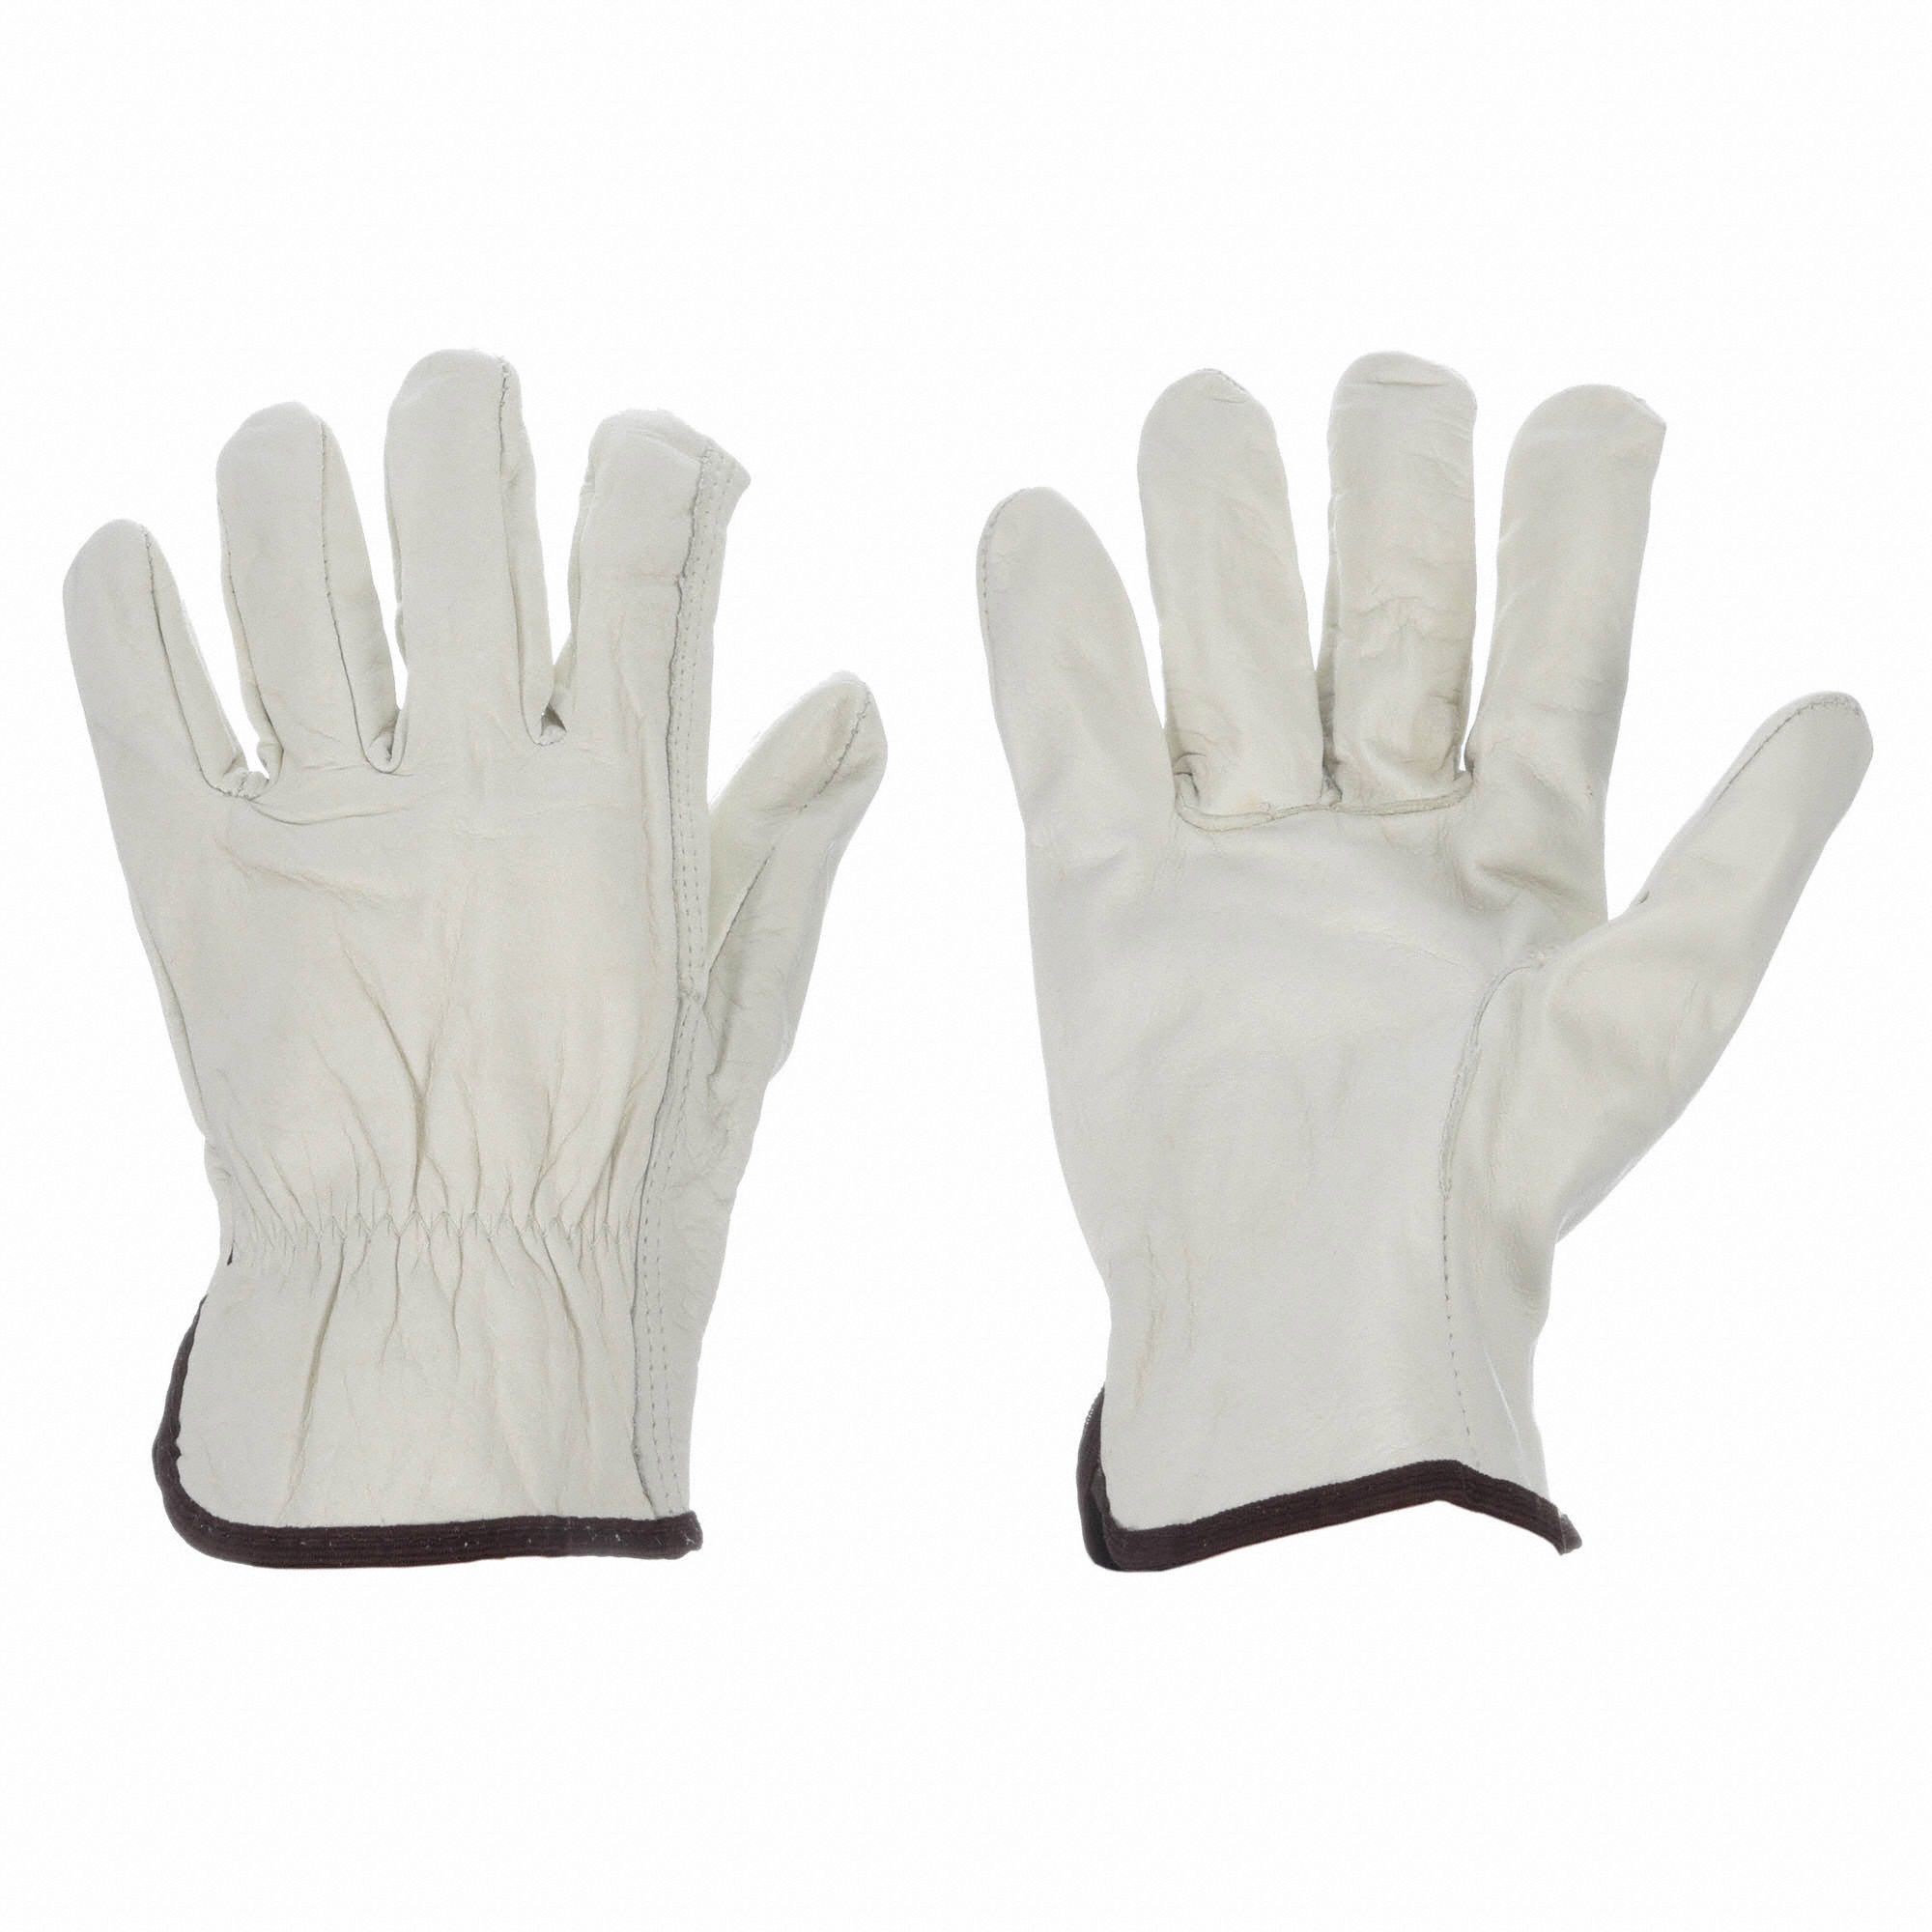 ProFlex® 710LTR Heavy-Duty Leather-Reinforced Gloves (Large) - GMC  ELECTRICAL, INC.